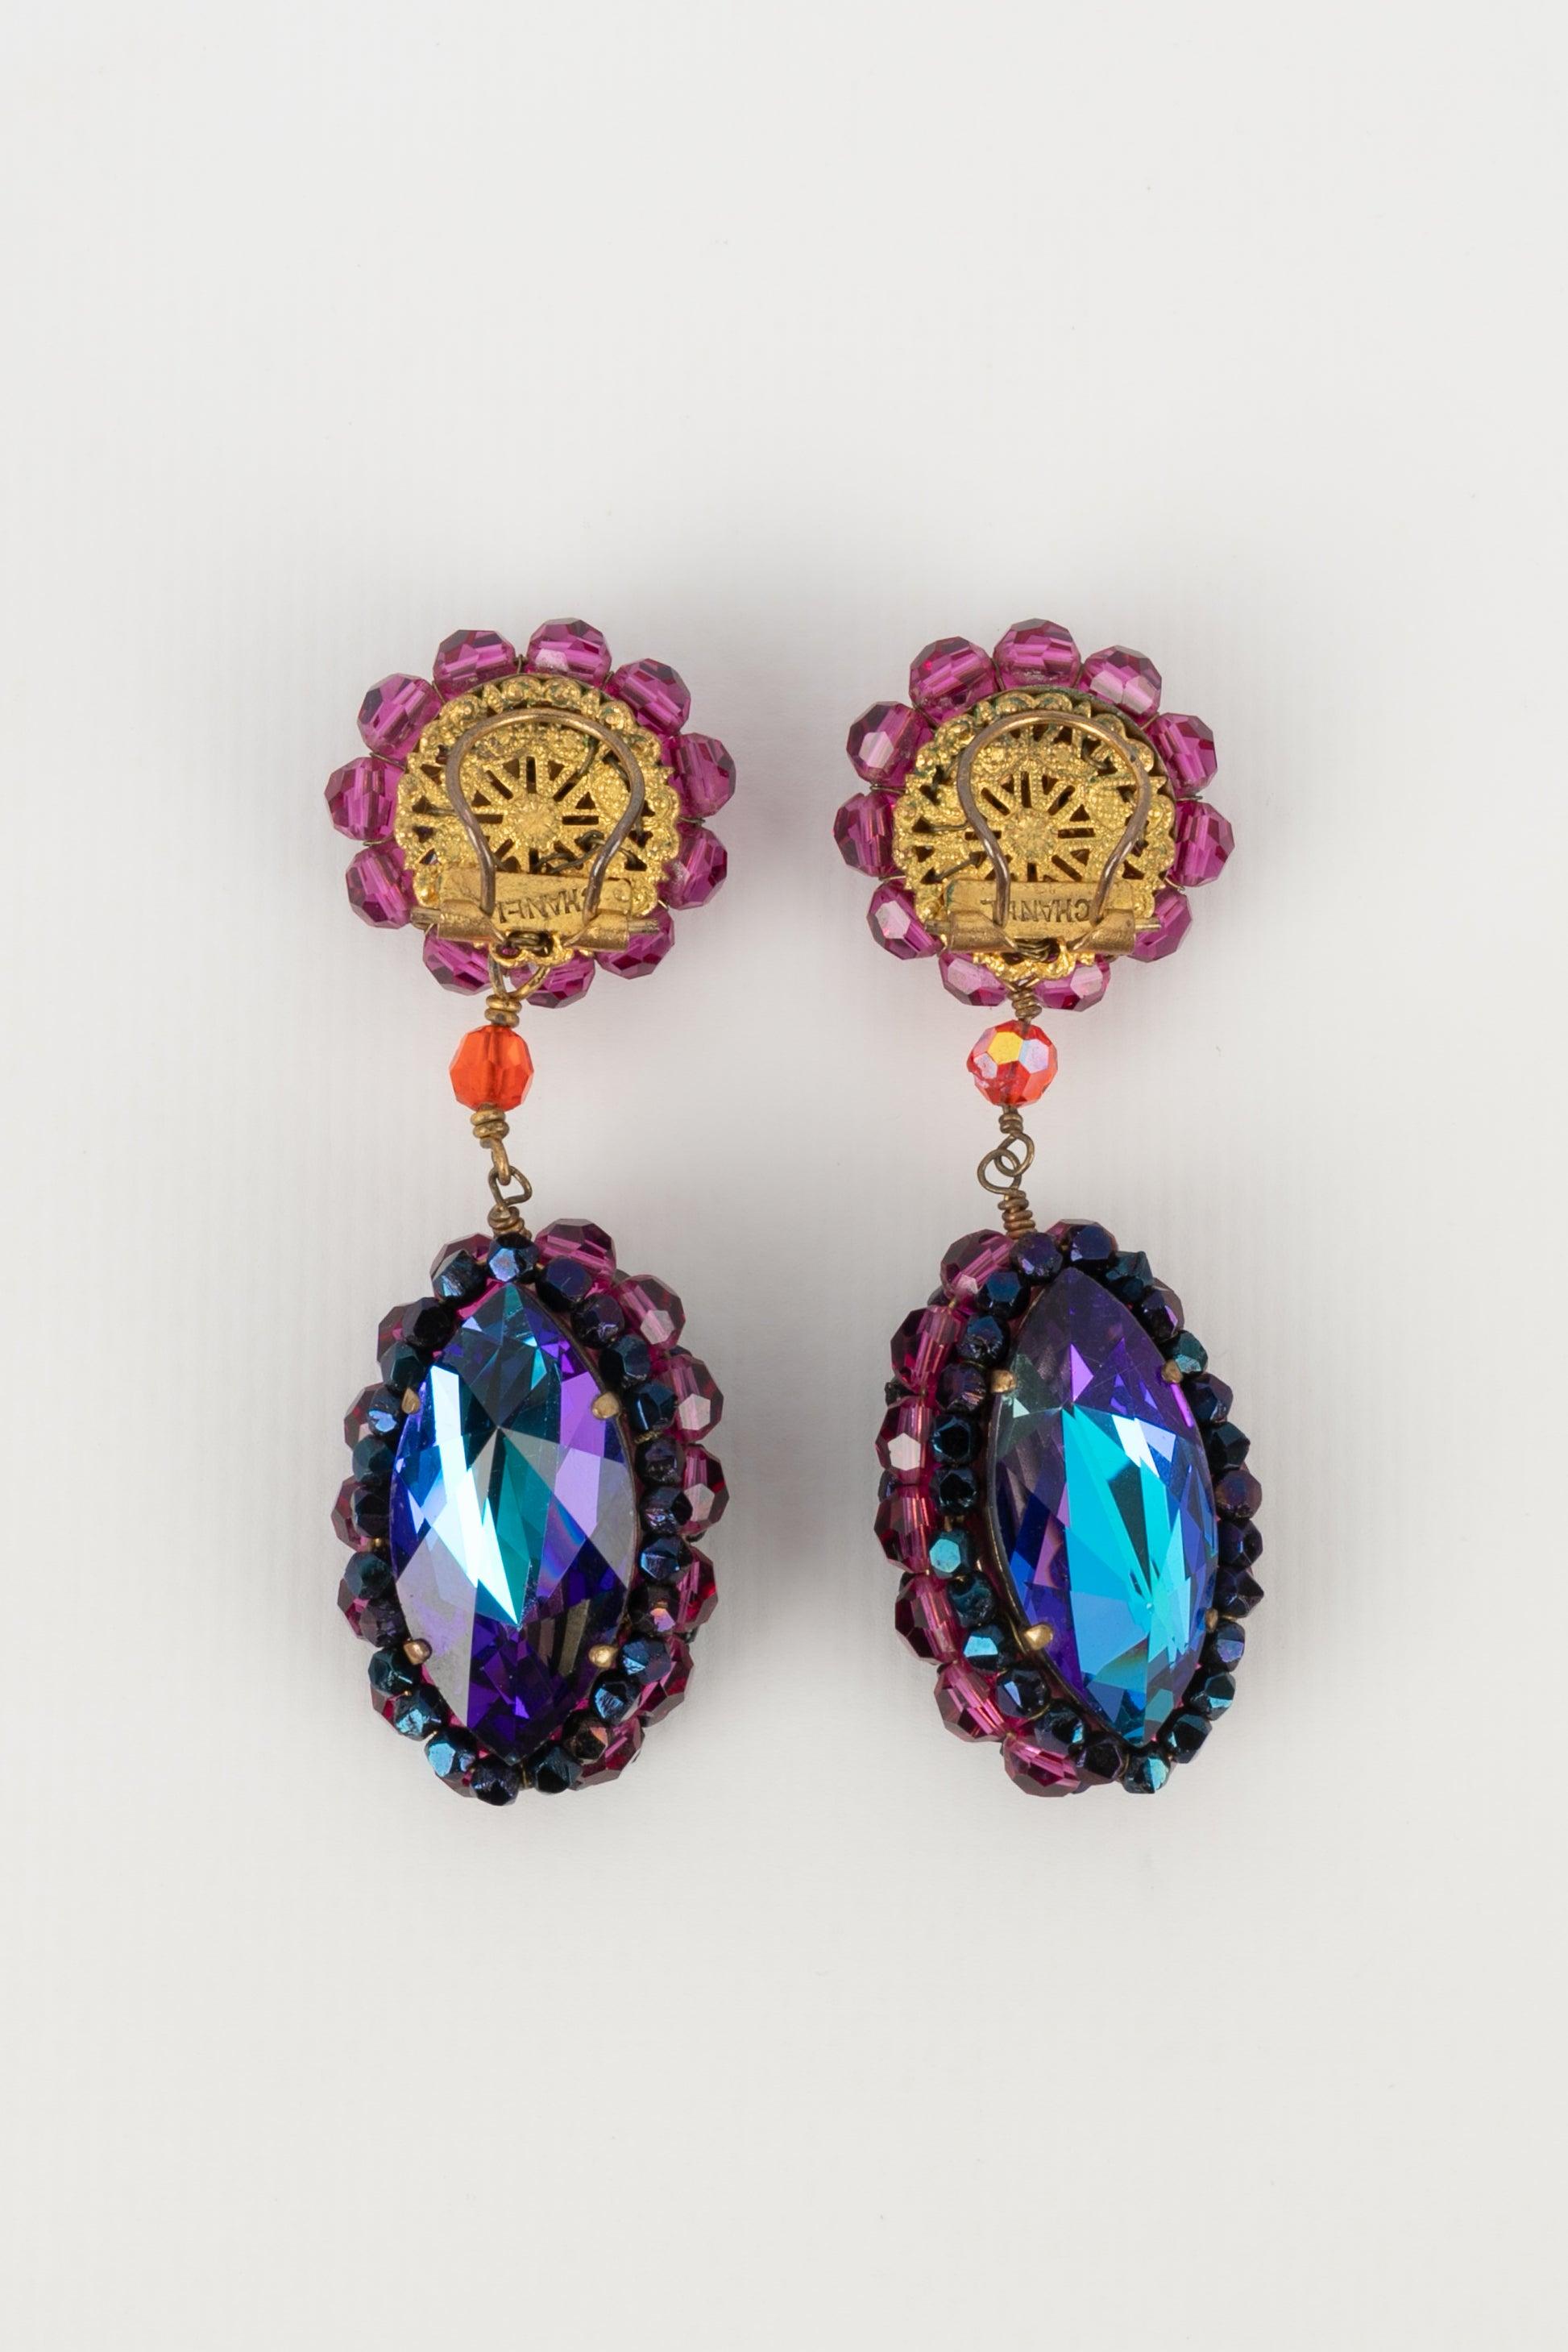 Chanel - Pendant earrings with a faceted rhinestone cabochon surrounded with glass pearls. Haute Couture jewelry from the Rousselet atelier, designed during the Coco era.

Additional information:
Condition: Very good condition
Dimensions: Height: 7